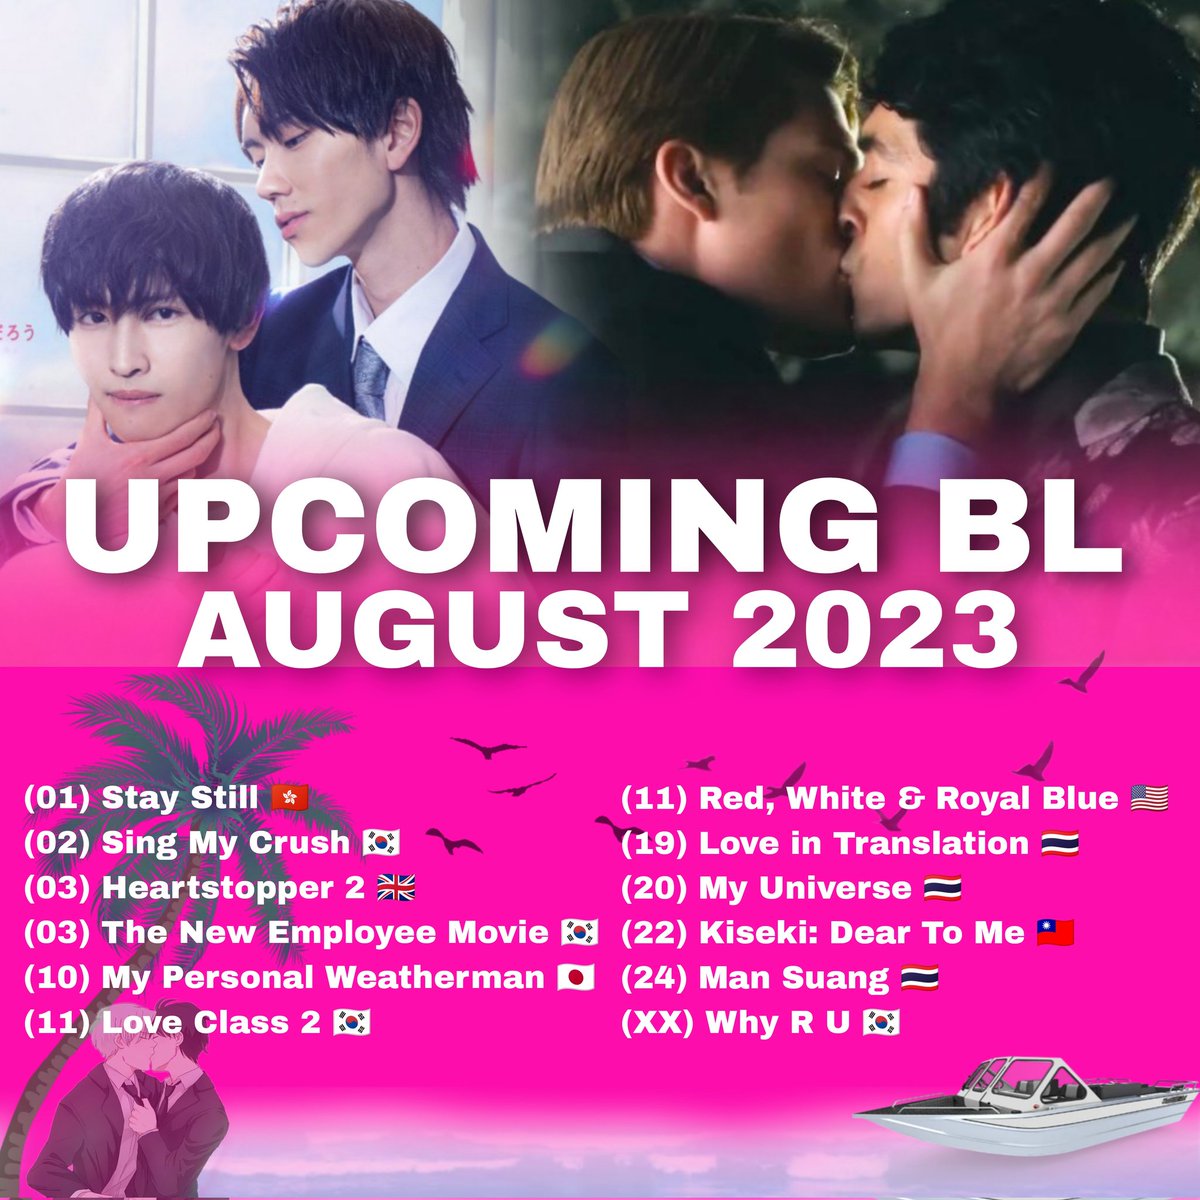 Upcoming BL August 2023! 
*
Missing: (12) Only Friends 🇹🇭

#BLAugust2023 #UpcomingBL